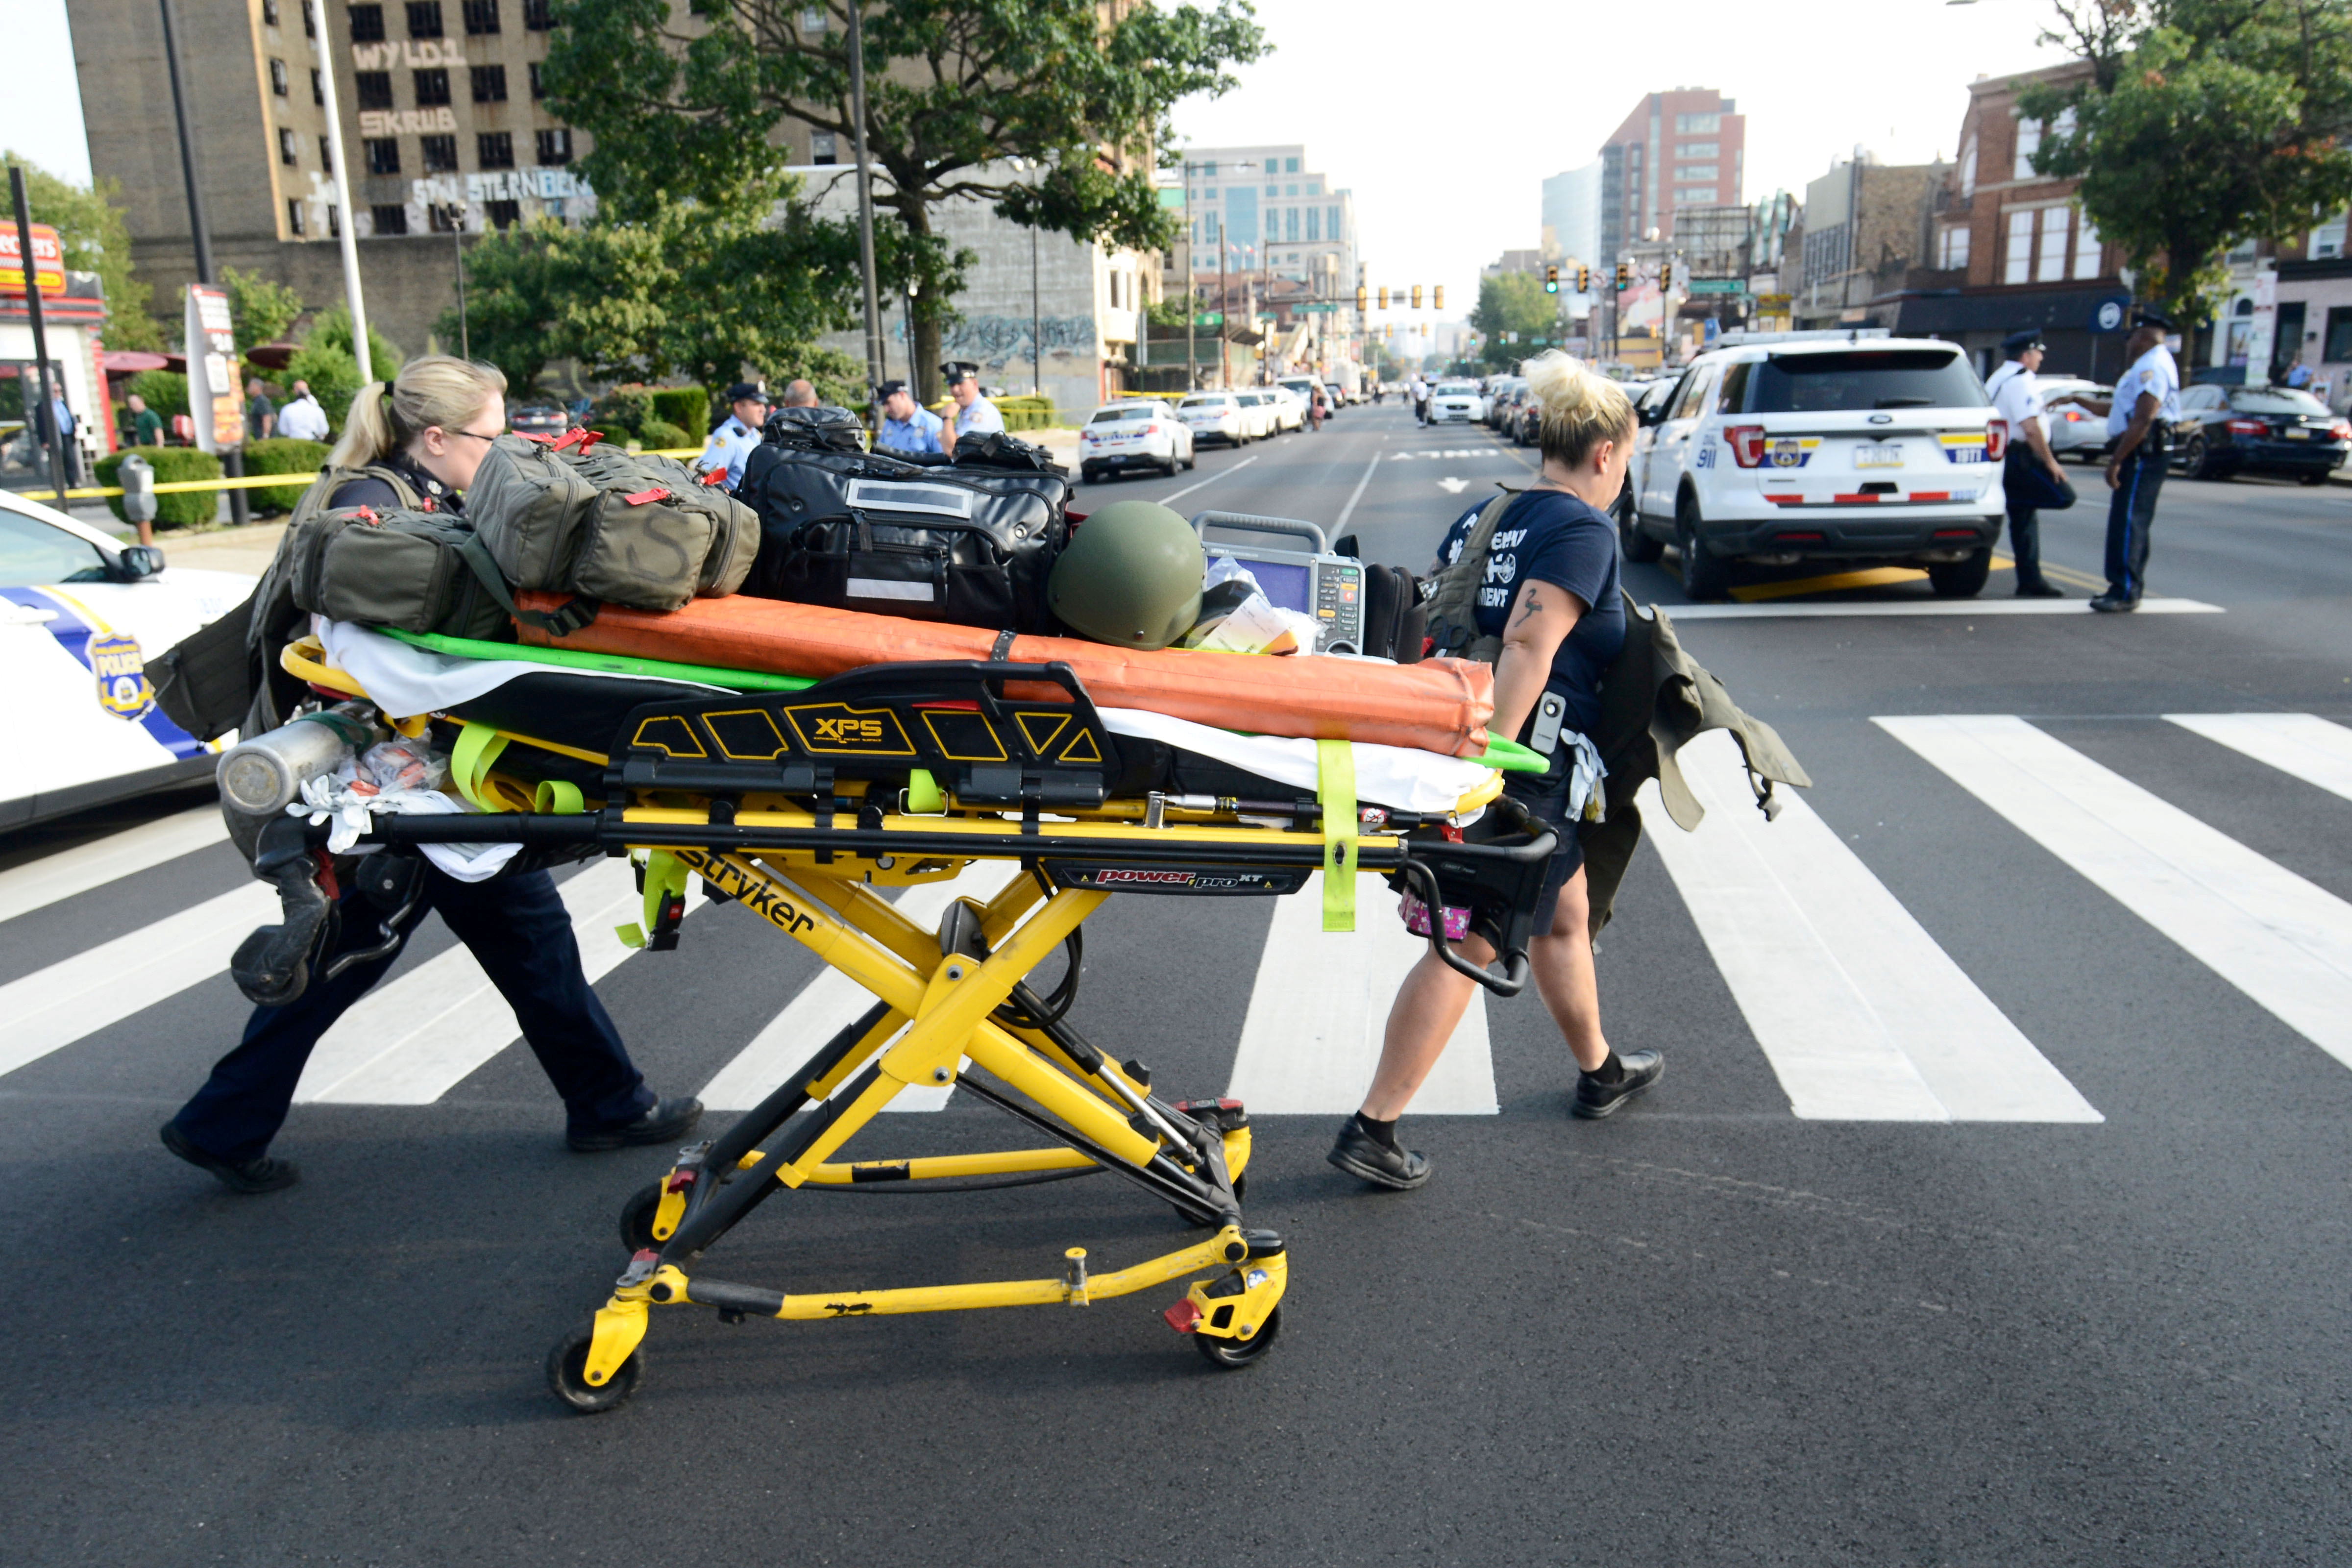 Paramedics roll a stretcher near the scene of a shooting incident in which several police were injured in Philadelphia, Pennsylvania, U.S. August 14, 2019. REUTERS/Bastiaan Slabbers